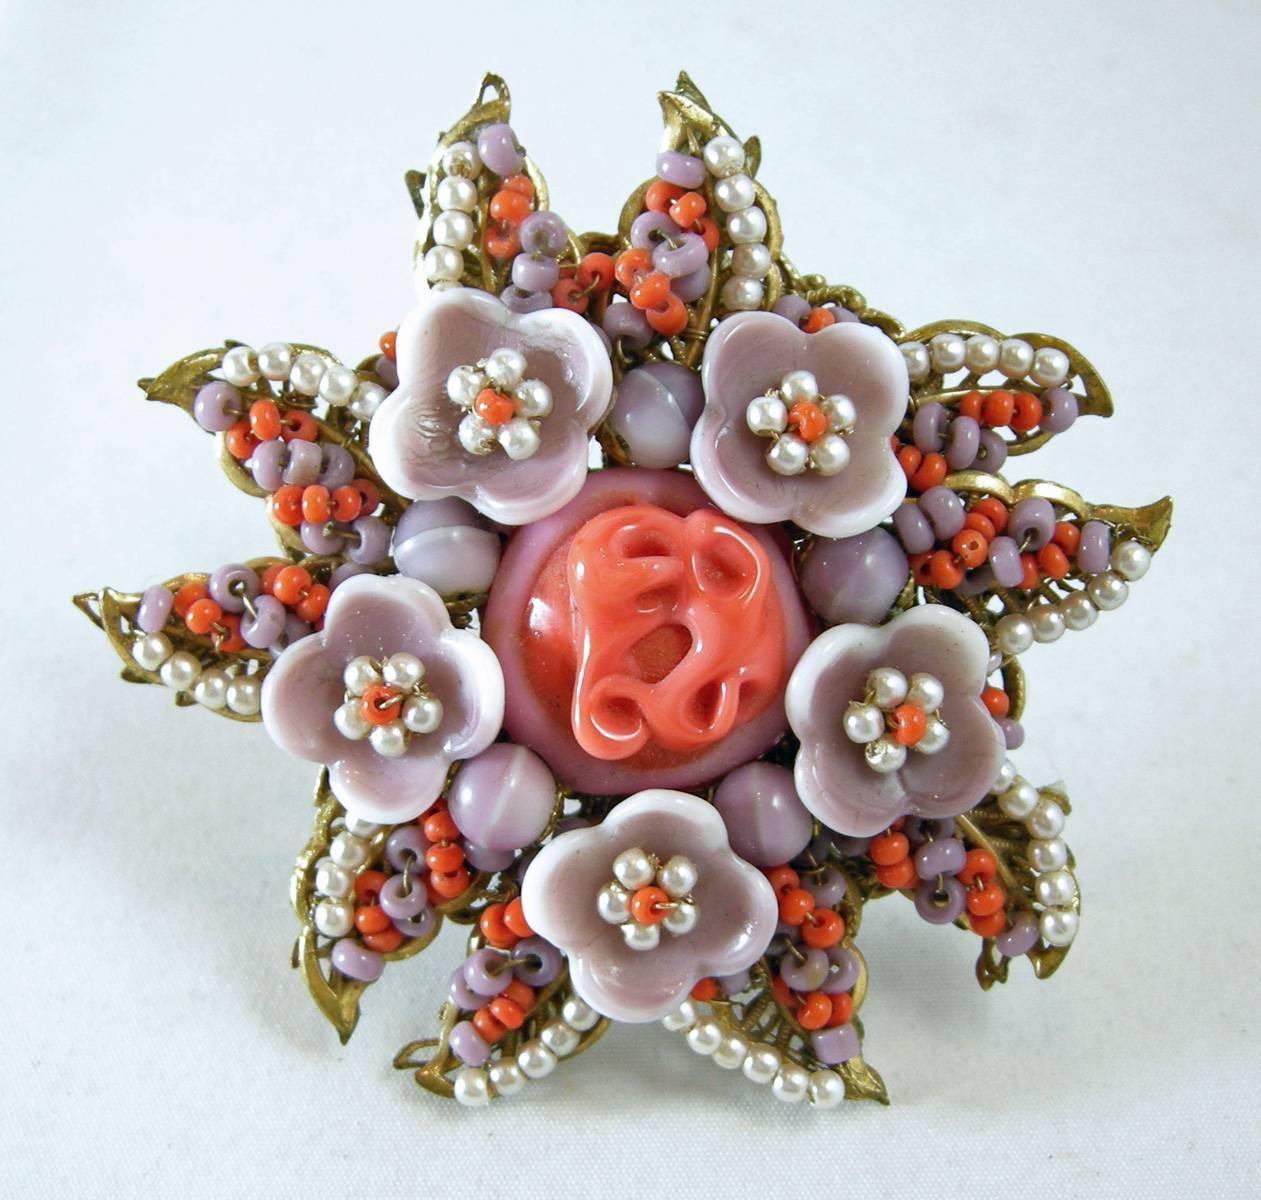 This vintage 1940s signed Miriam Haskell brooch pin features an ornate floral design with coral, lavender glass beads and seed faux pearls in a gold-tone setting.  In excellent condition, this pin measures 2-1/2” in diameter with a c-pin clasp and